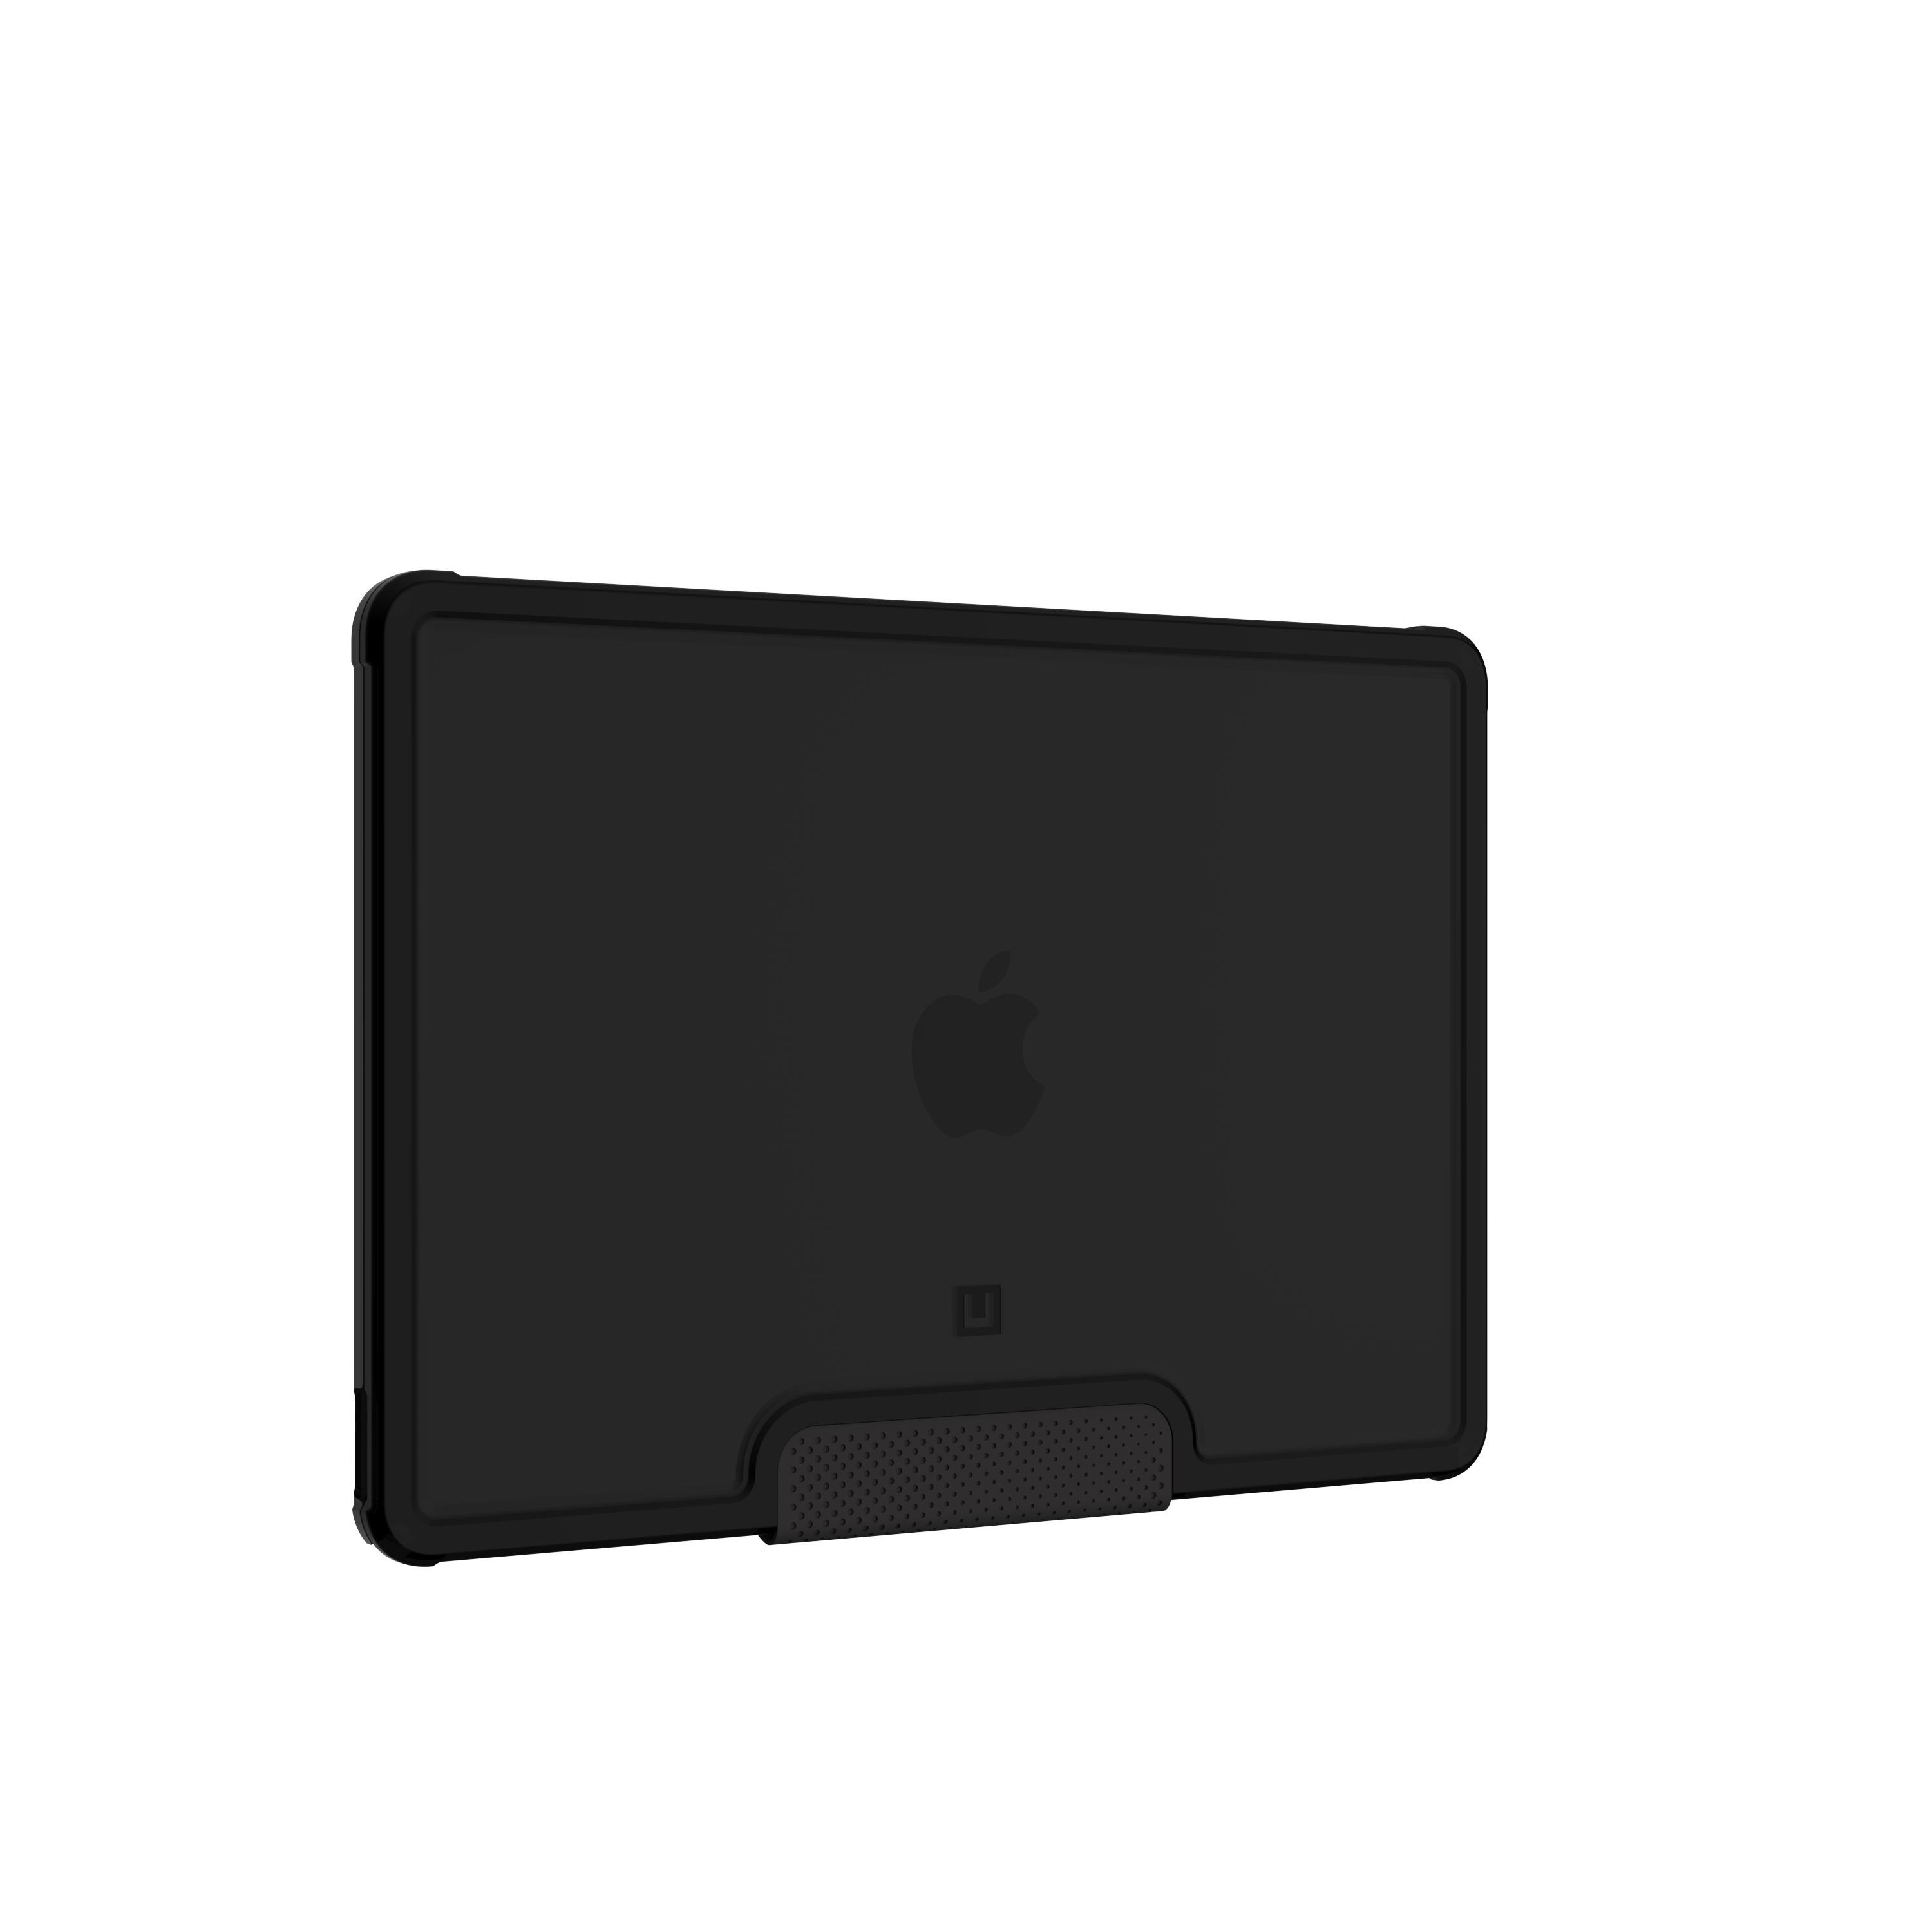 MacGuard Protective Case for MacBook Air 13 (2022 M2 Models)